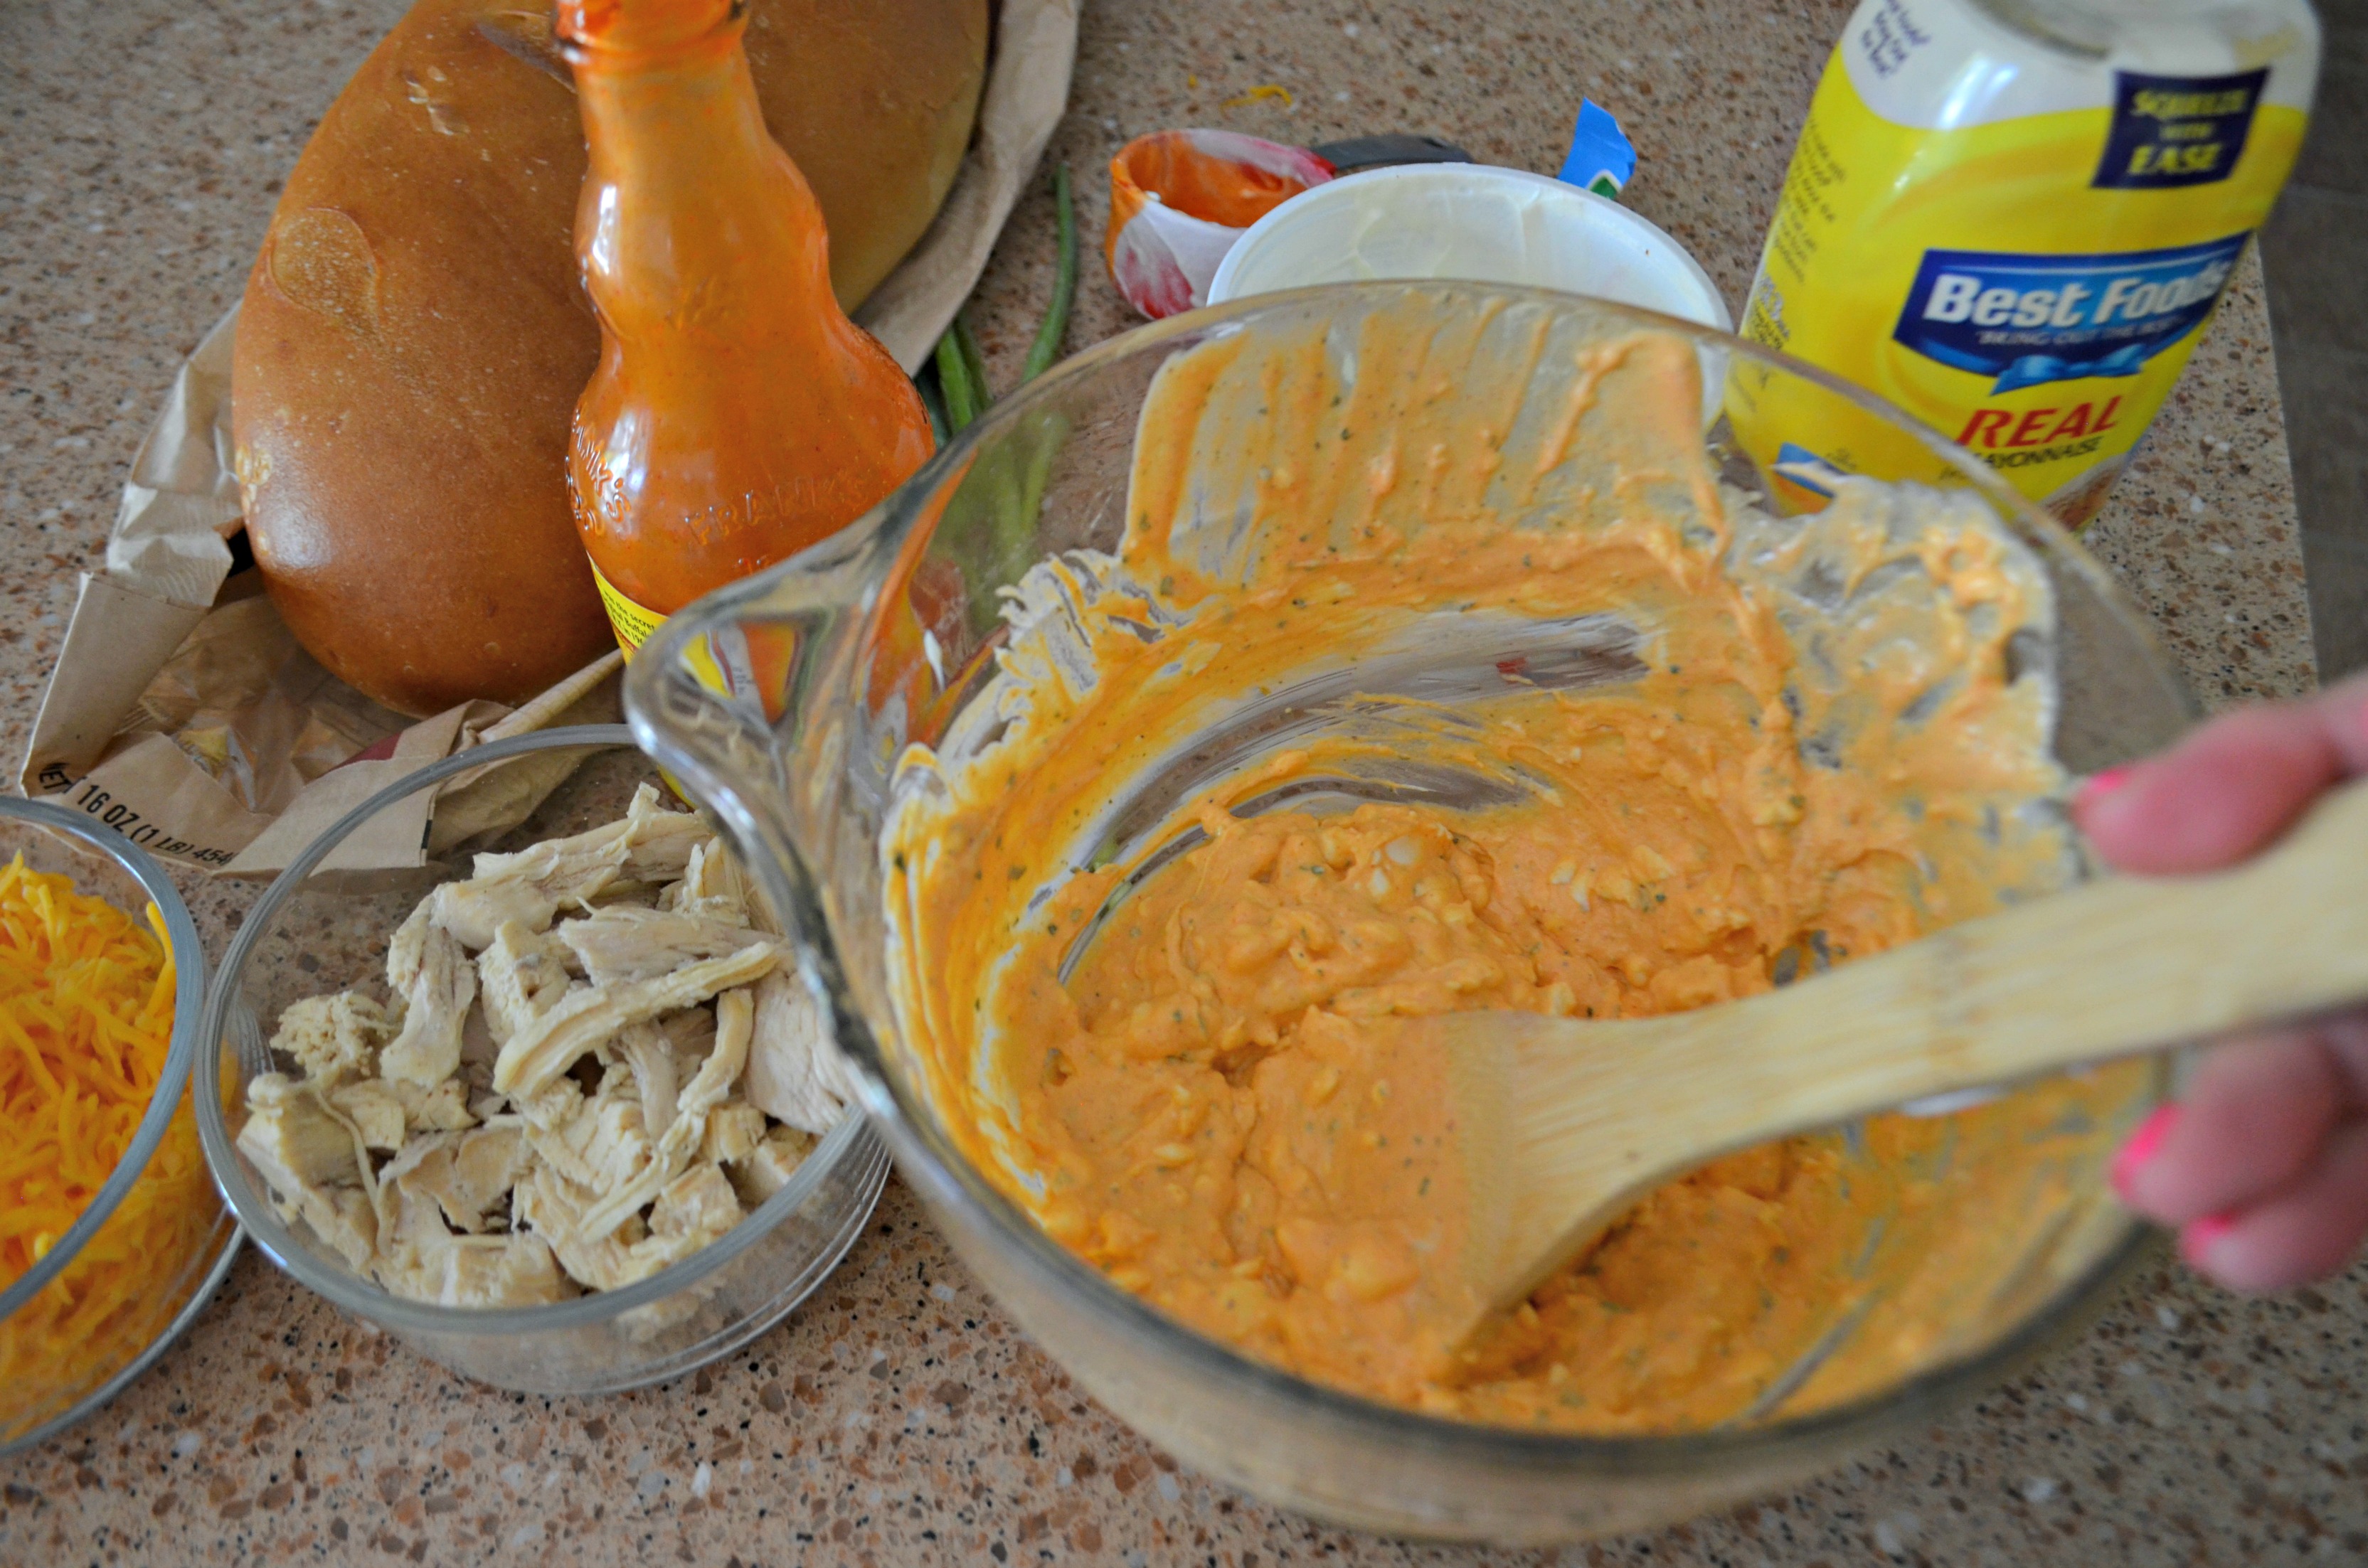 Buffalo Chicken Dip Bread Bowl - mixing the ingredients in a mixing bowl